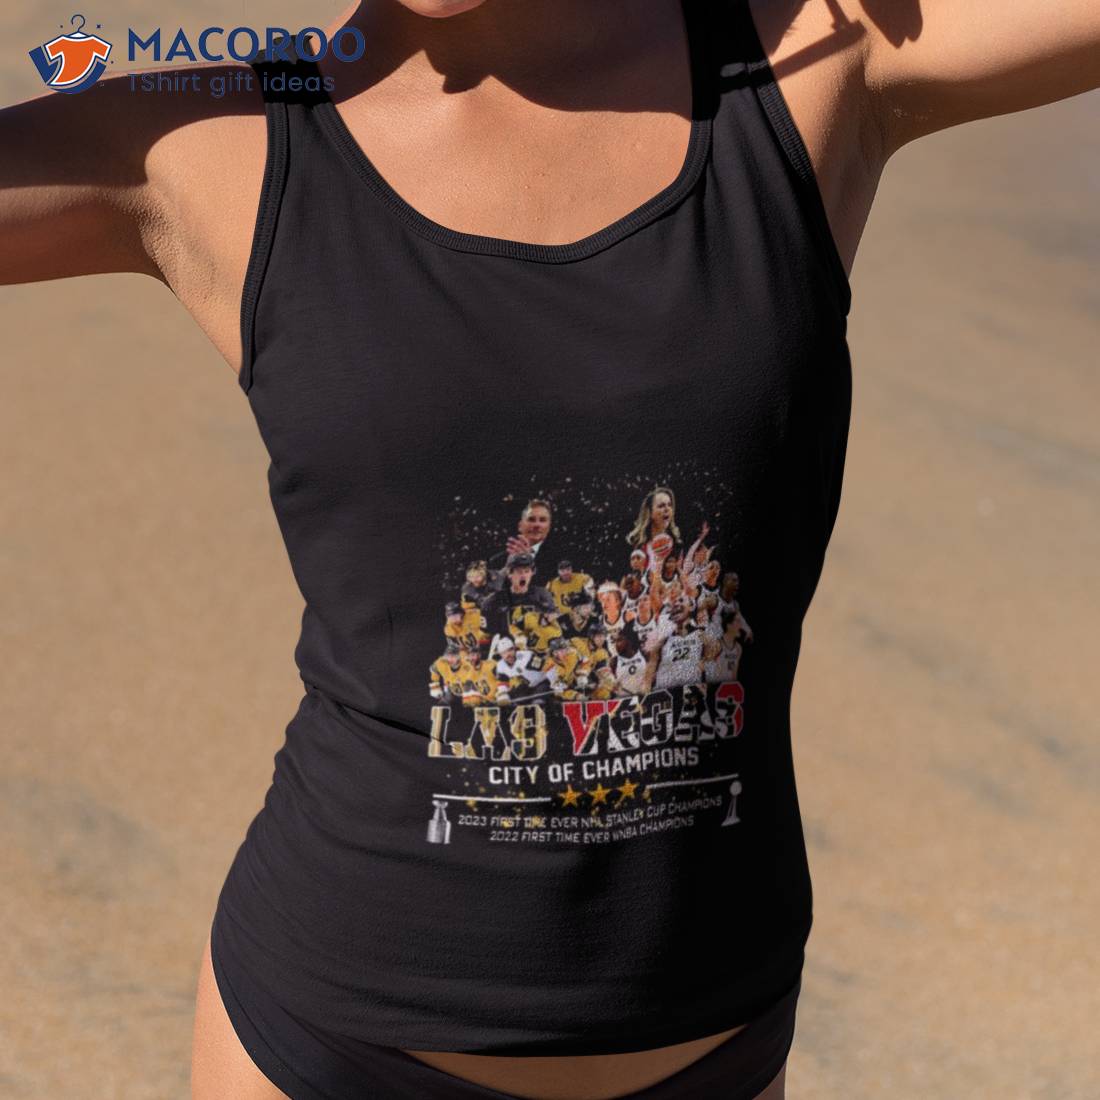 https://images.macoroo.com/wp-content/uploads/2023/06/las-vegas-city-of-champions-nhl-stanley-cup-and-wnba-champions-shirt-tank-top-2.jpg